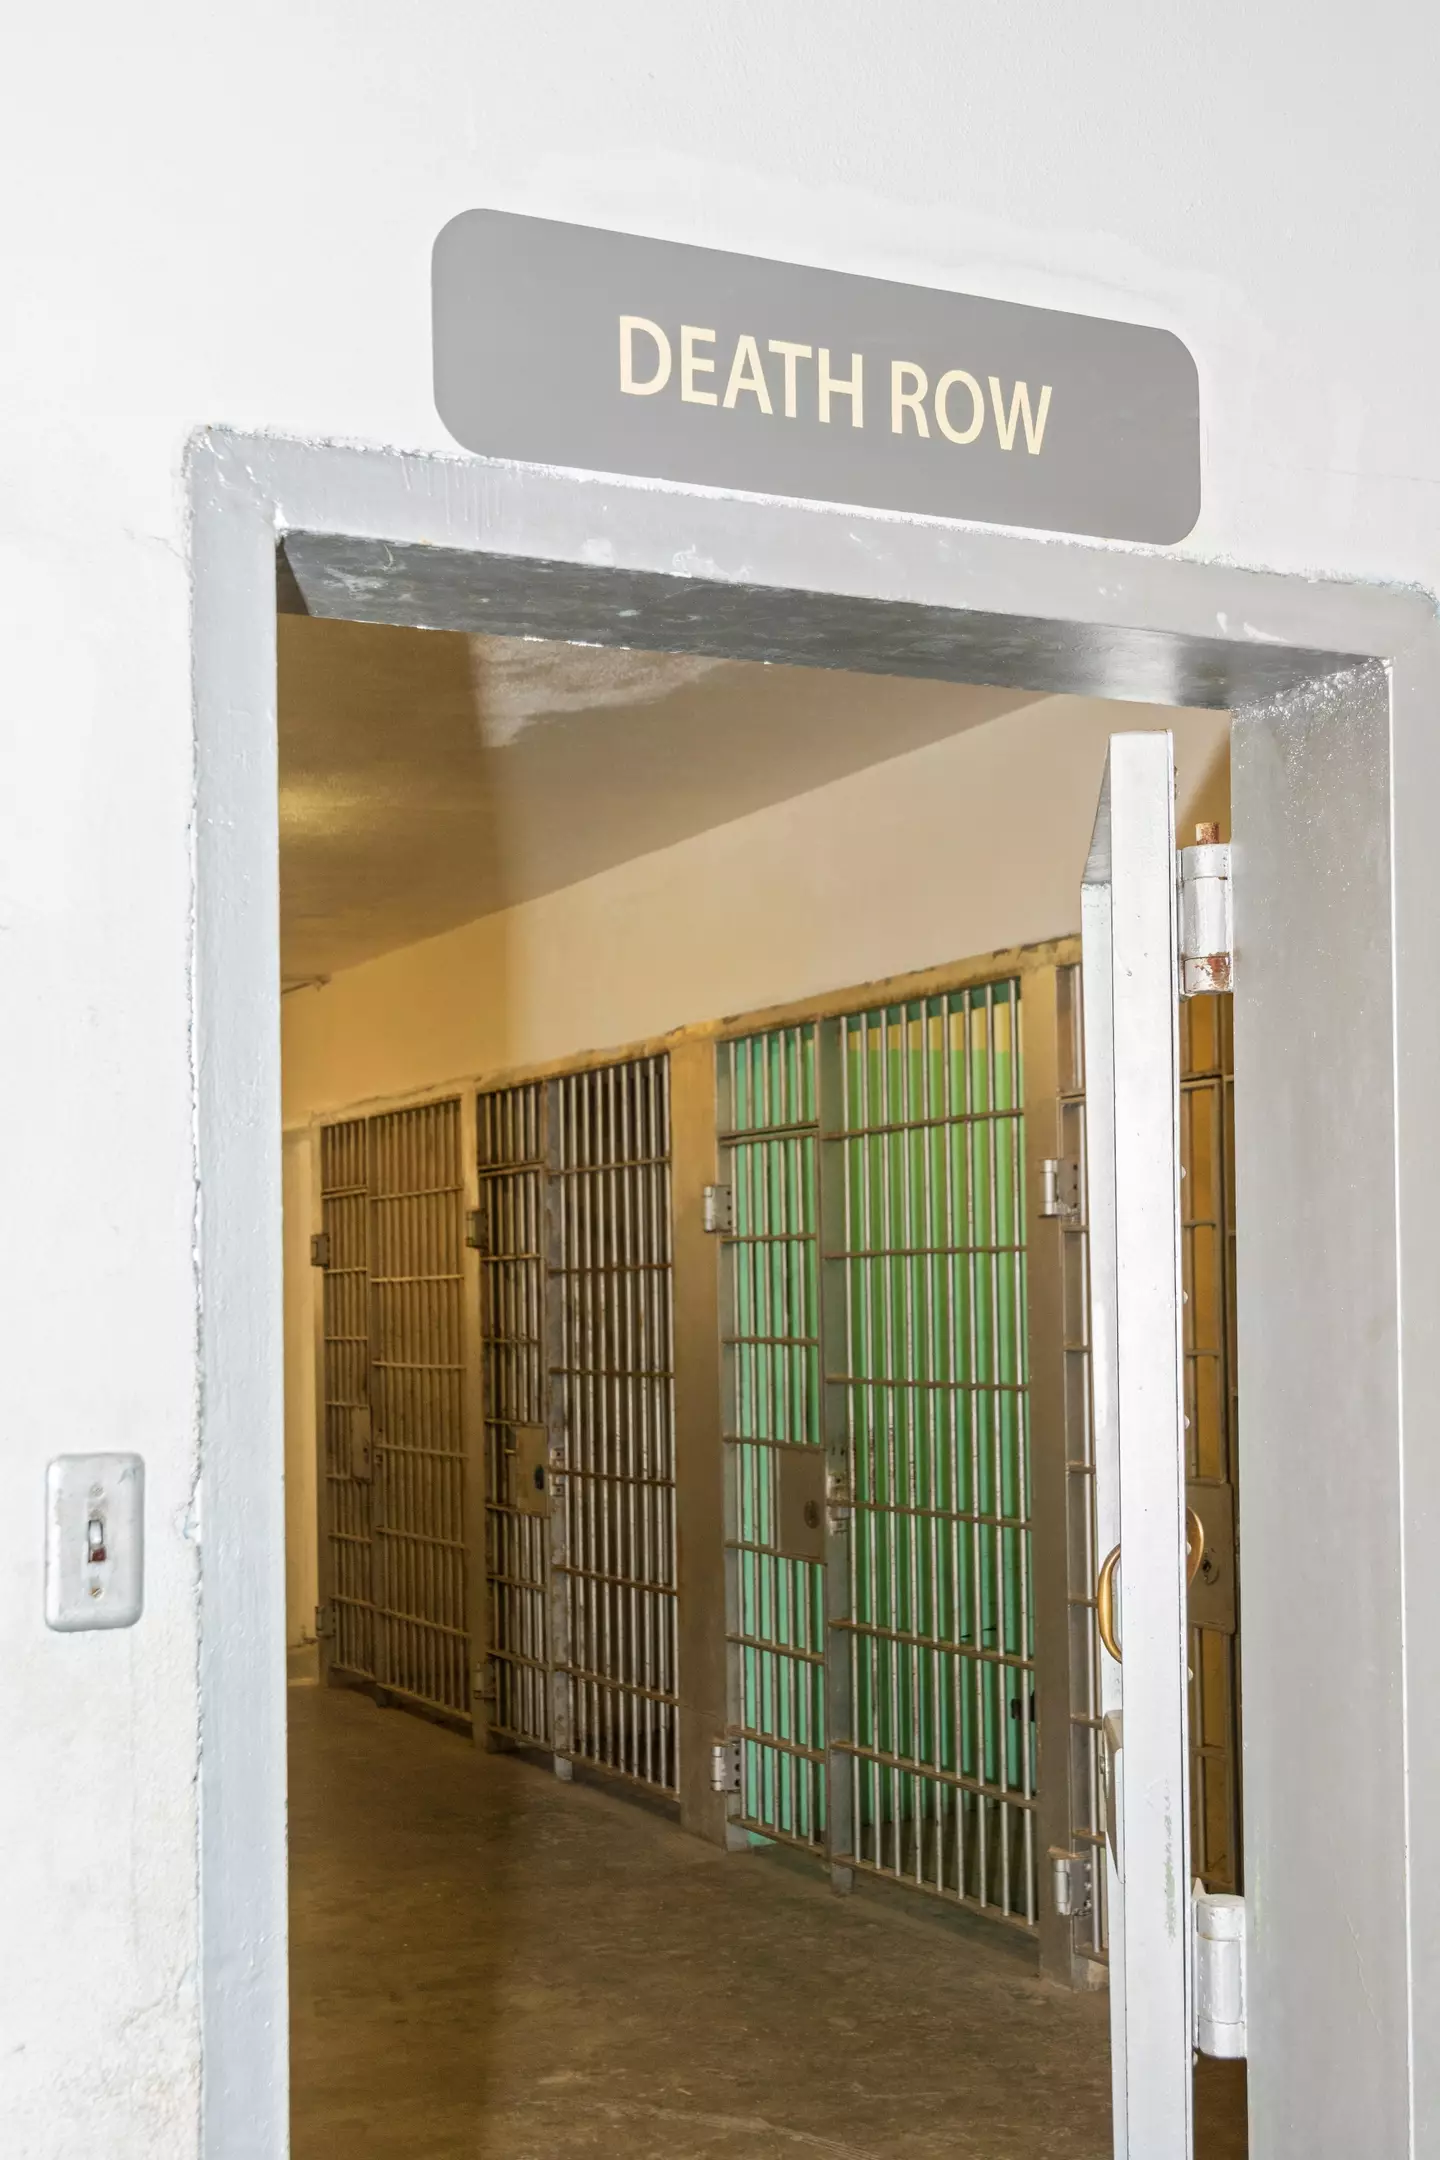 Moore has spent more than 10 years on death row.